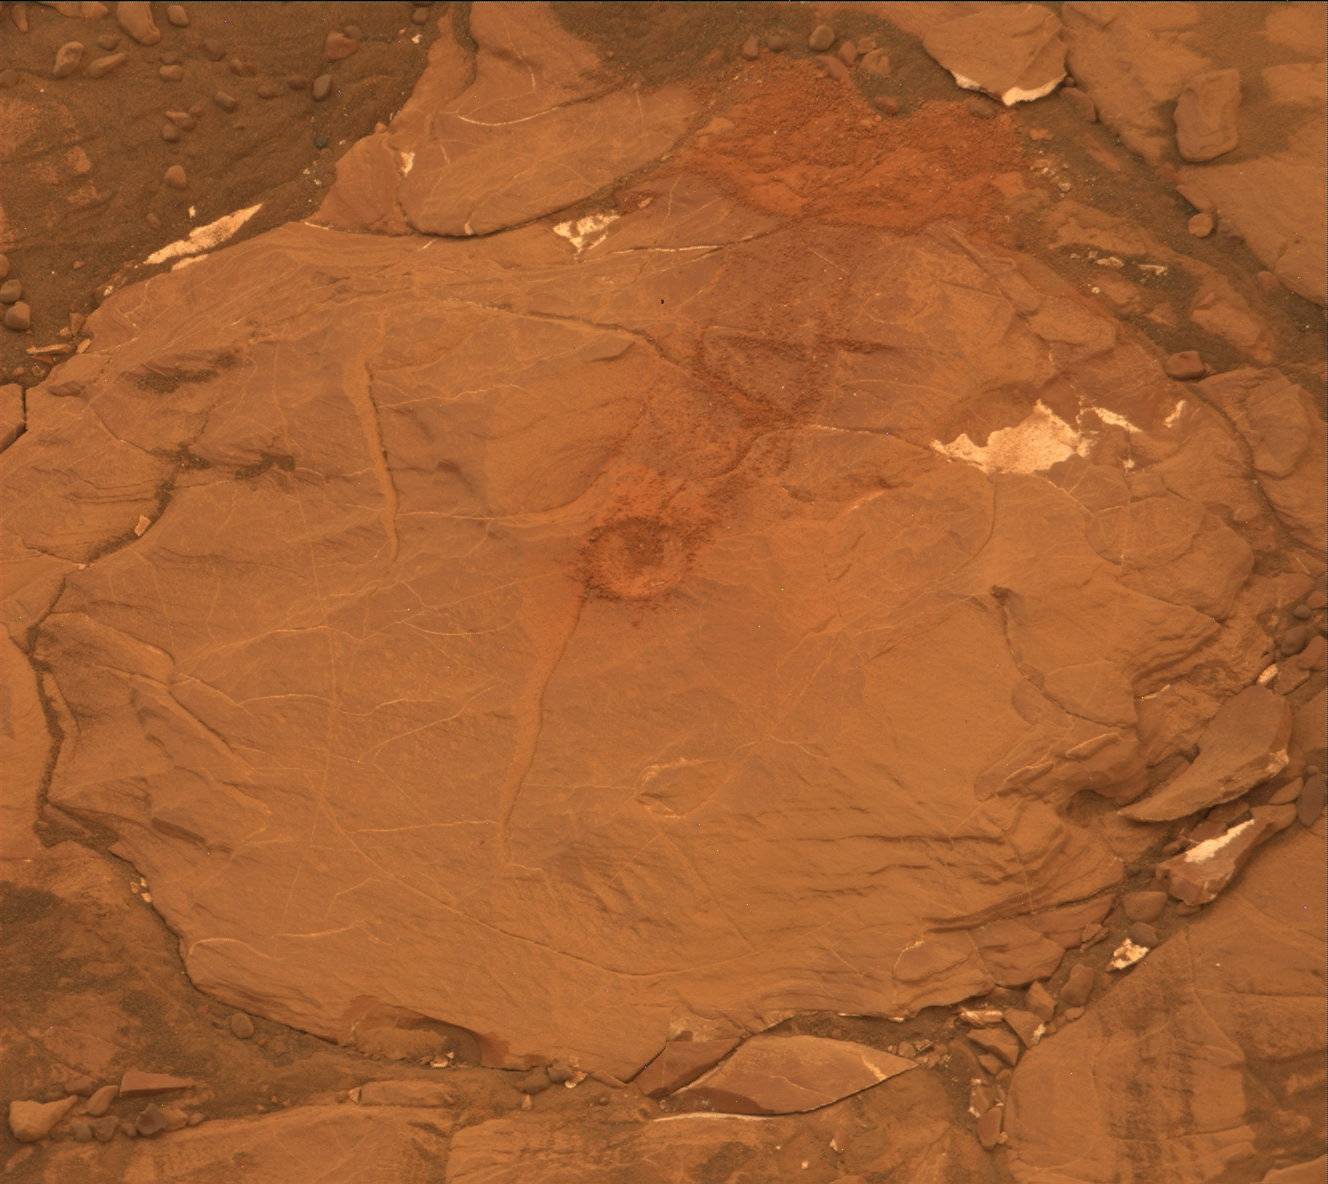 Sol 2114: Finishing Up at the Voyageurs Drill Site